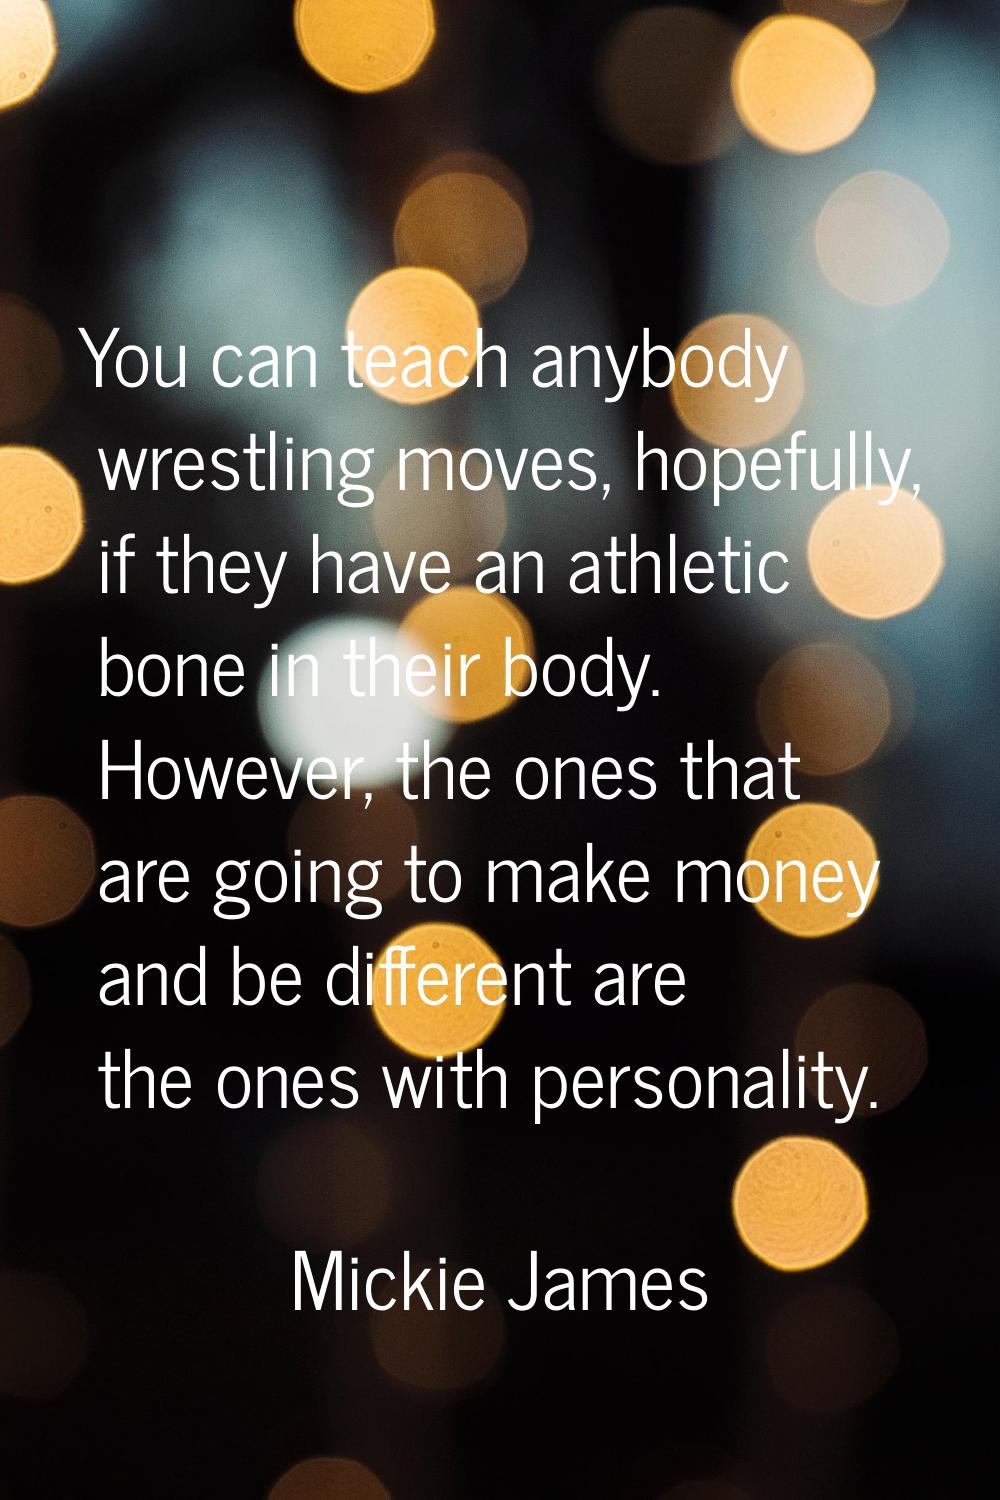 You can teach anybody wrestling moves, hopefully, if they have an athletic bone in their body. Howe